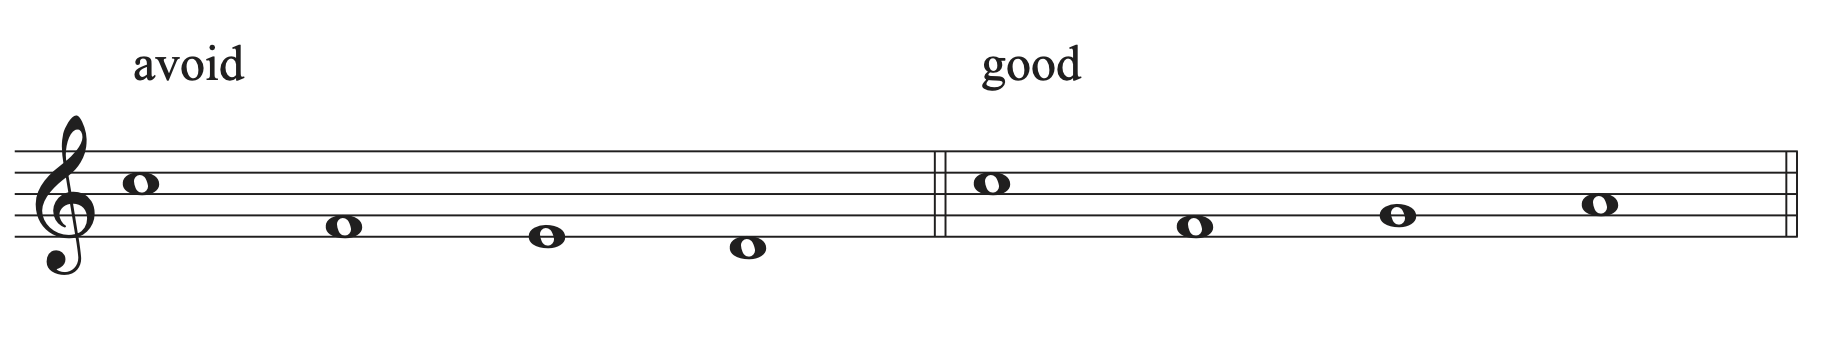 Two musical examples, the first showing bad part writing using a large leap and continuing in the same direction, and the second showing a good part writing example using a large leap followed by stepwise motion in the opposite direction.